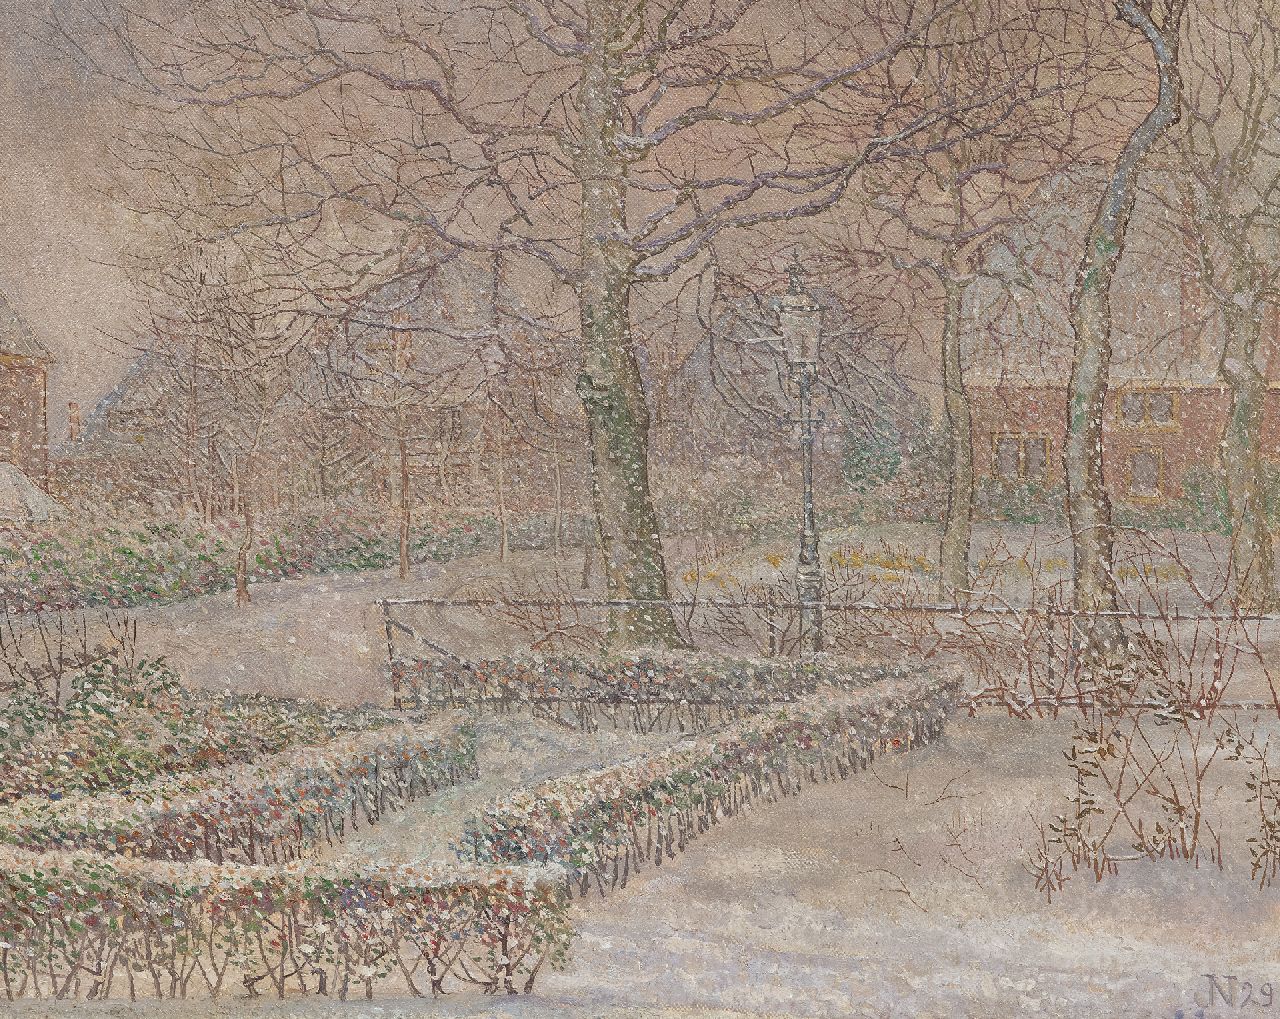 Nieweg J.  | Jakob Nieweg, The artist's snowy garden, Amersfoort, oil on canvas 40.5 x 50.5 cm, signed l.r. with monogram and dated '29